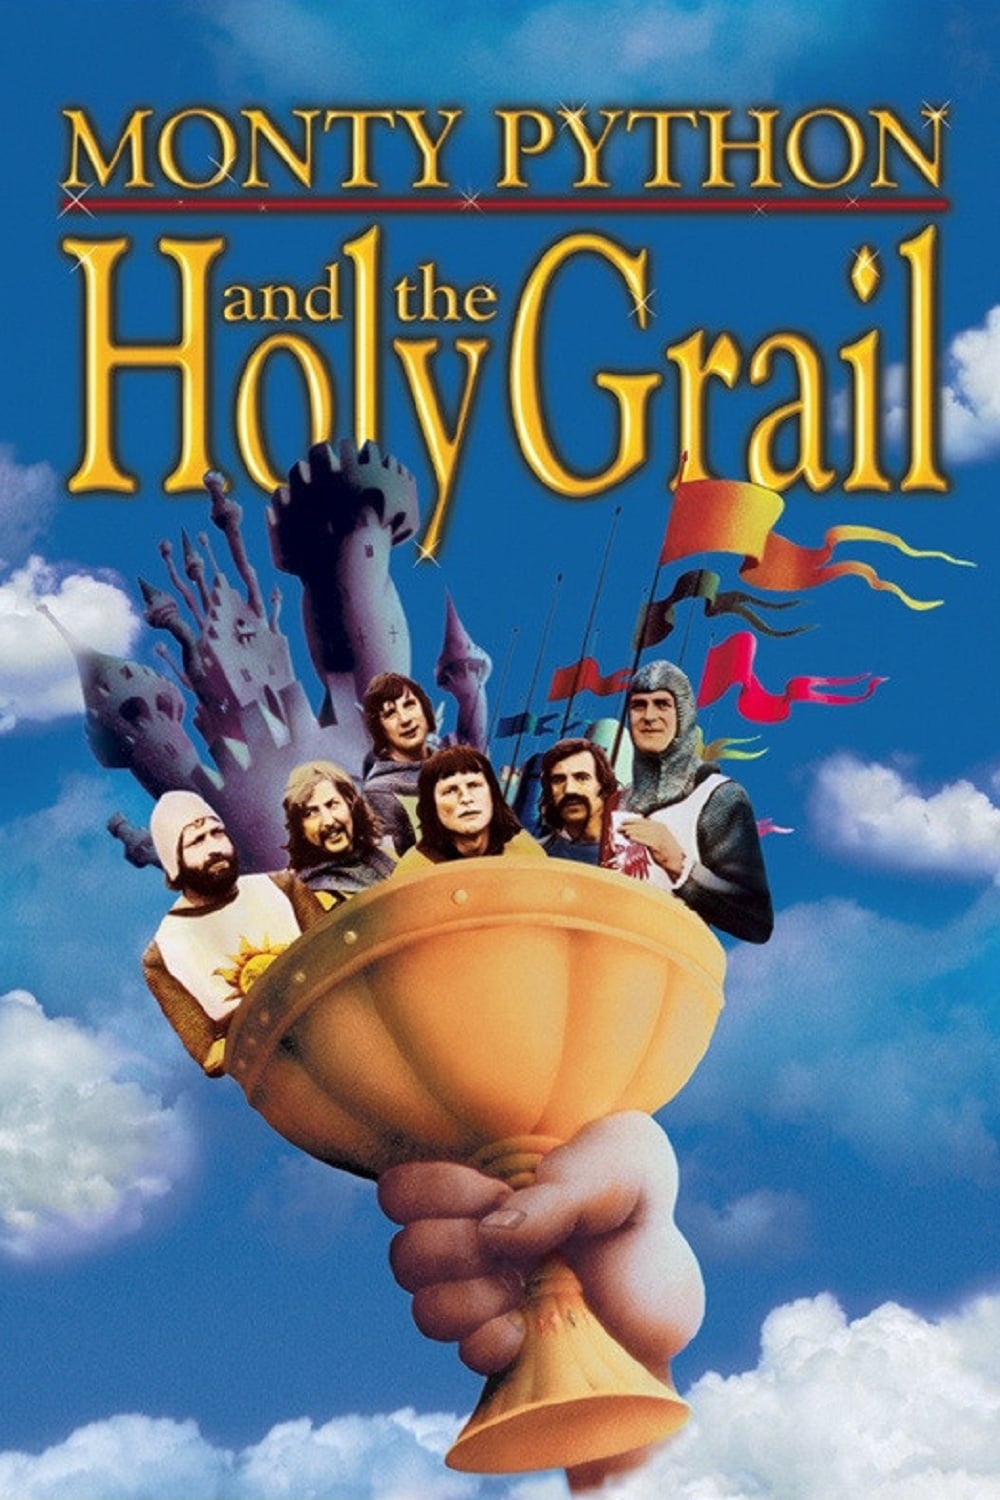 Watch Monty Python And The Holy Grail 1975 Online Hd Full Movies